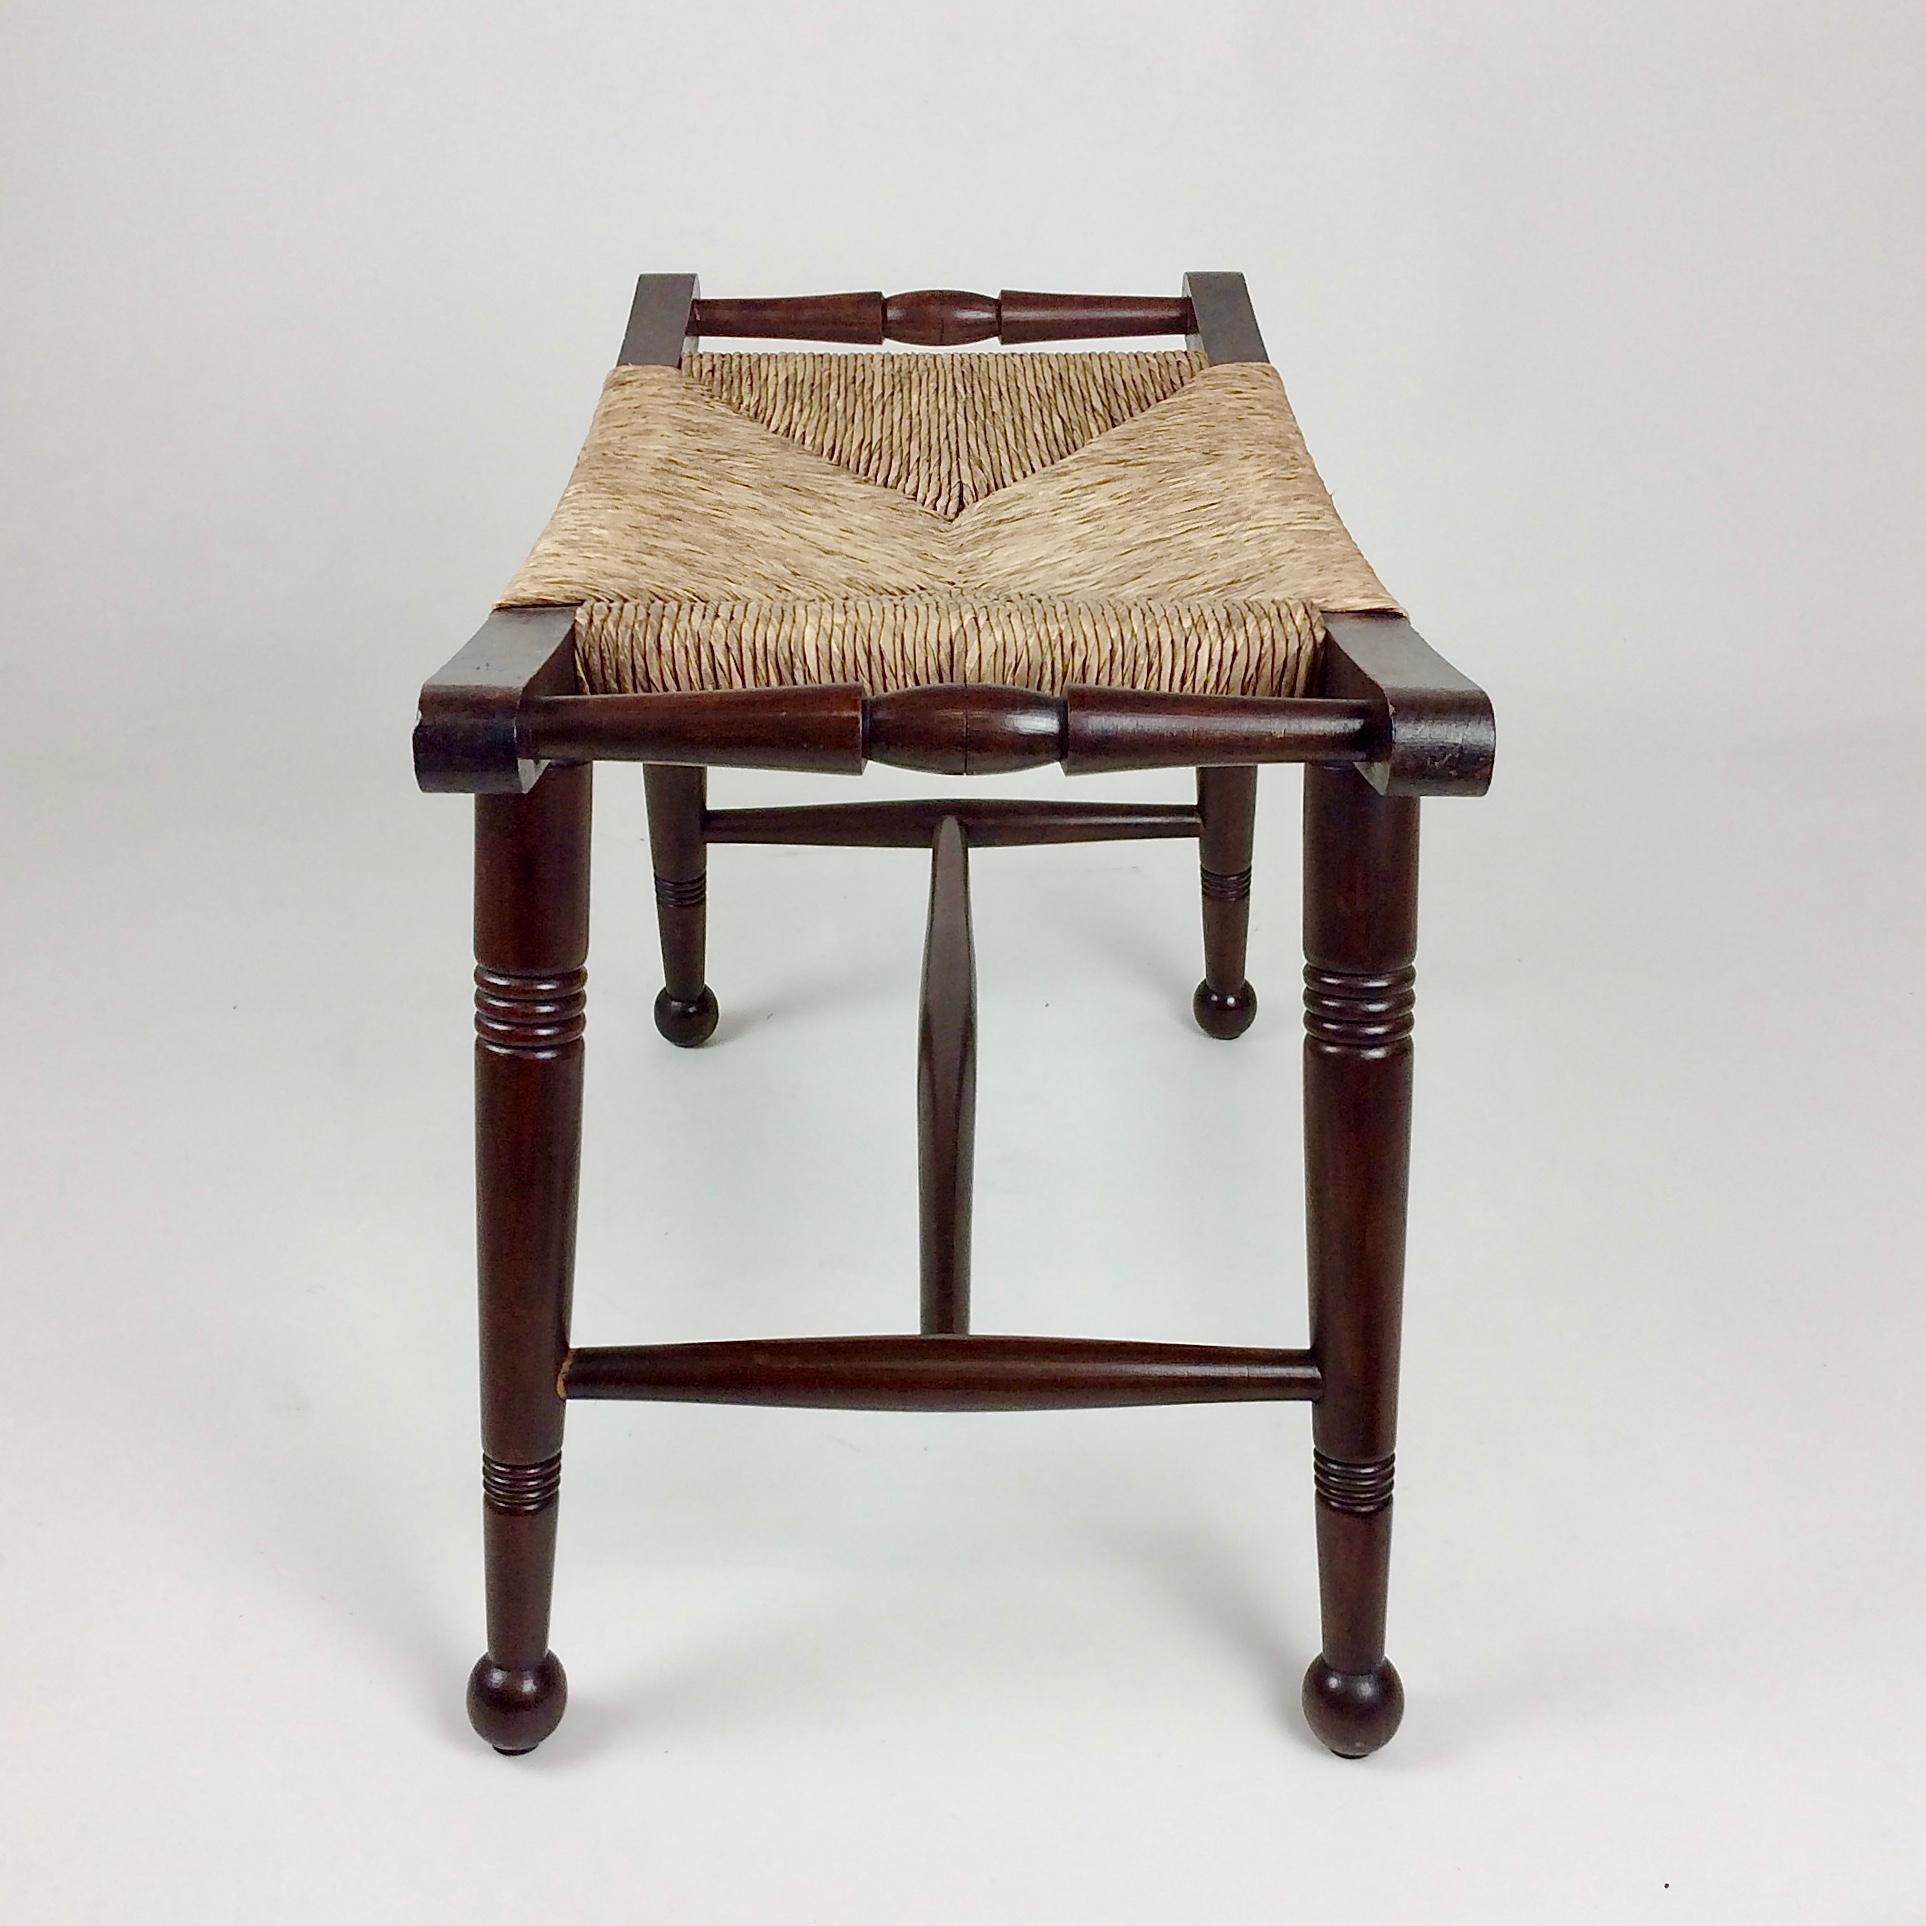 Turned Arts & Crafts Wood and Straw Stool, Early 20th Century, United Kingdom For Sale